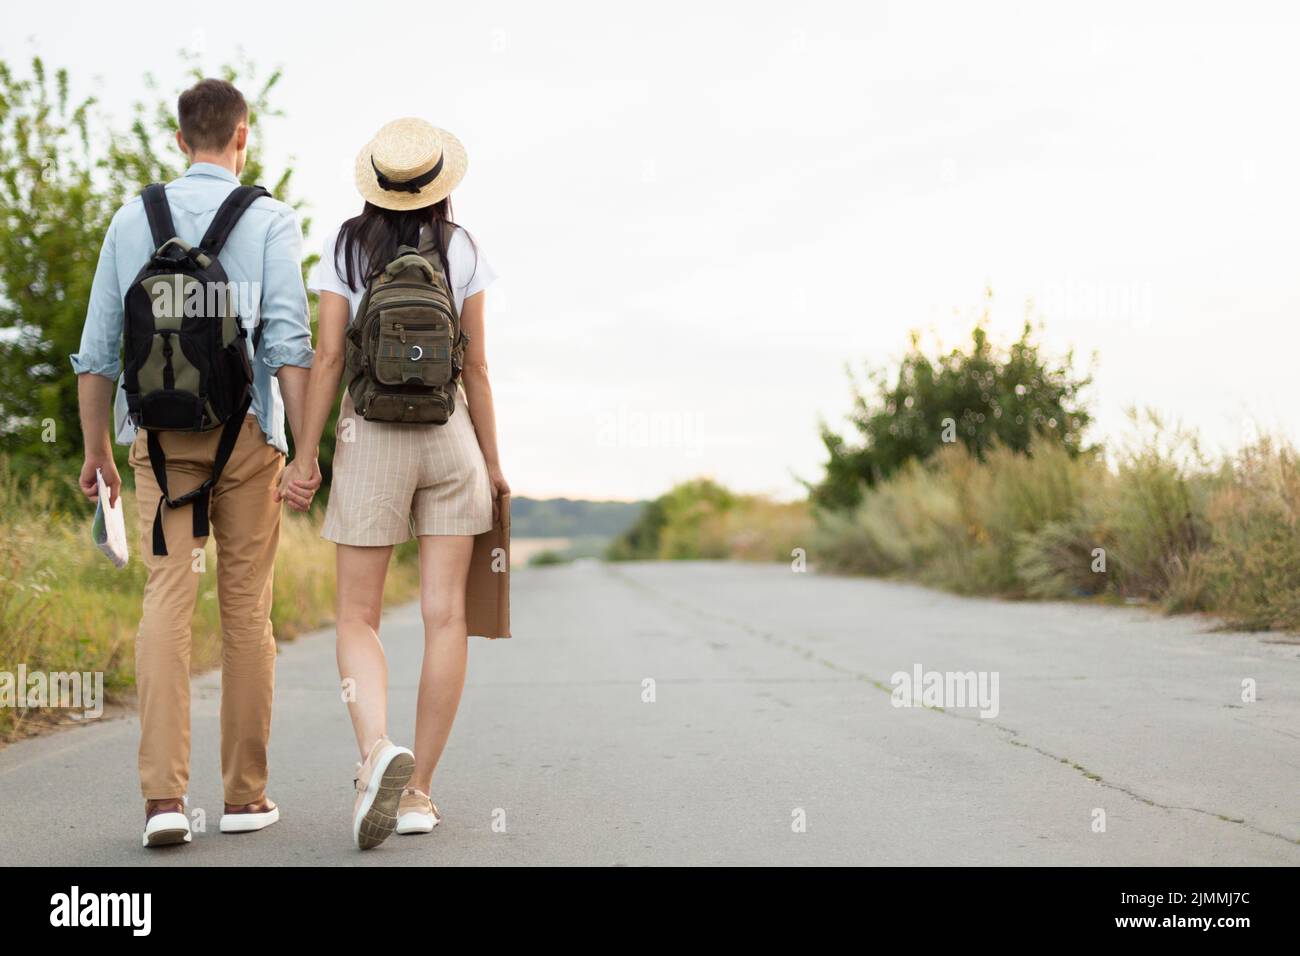 Back view young couple walking down road Stock Photo